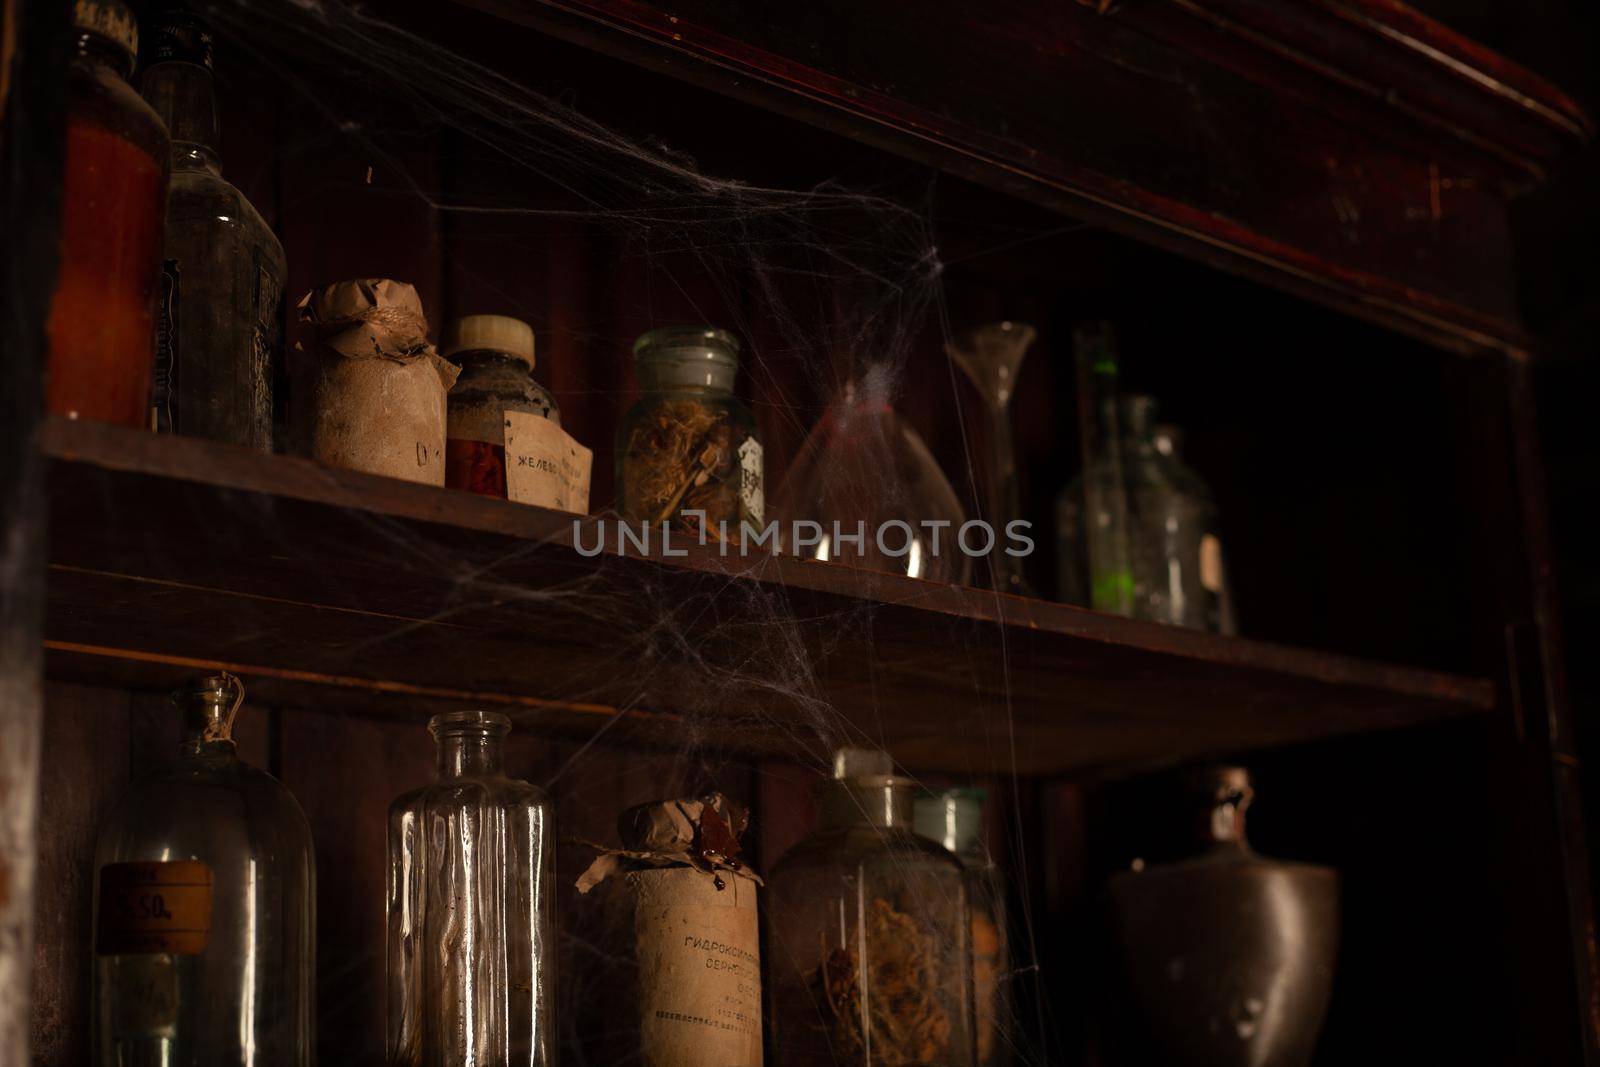 Halloween background Shelves with alchemy tools Skull spiderweb bottle with poison candles Witcher workspace Scarry room